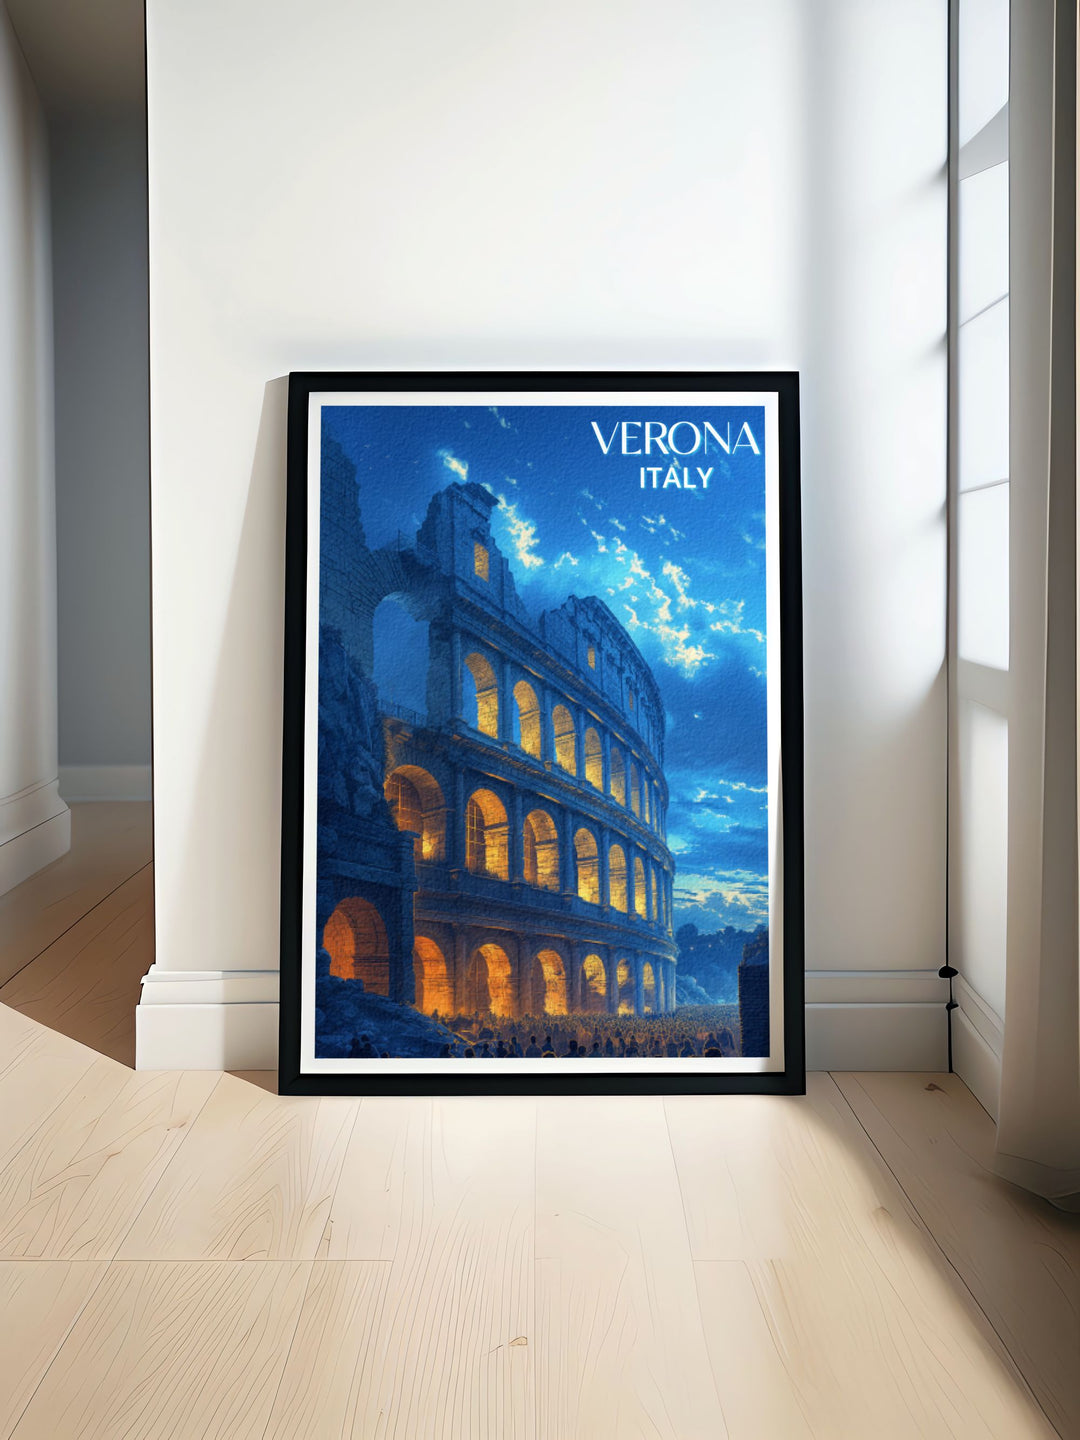 The Verona Arena, an ancient Roman amphitheater, is depicted in this exquisite print. The artwork highlights the Arenas architectural details and historical importance, making it a must have for history enthusiasts and lovers of Italian landmarks.